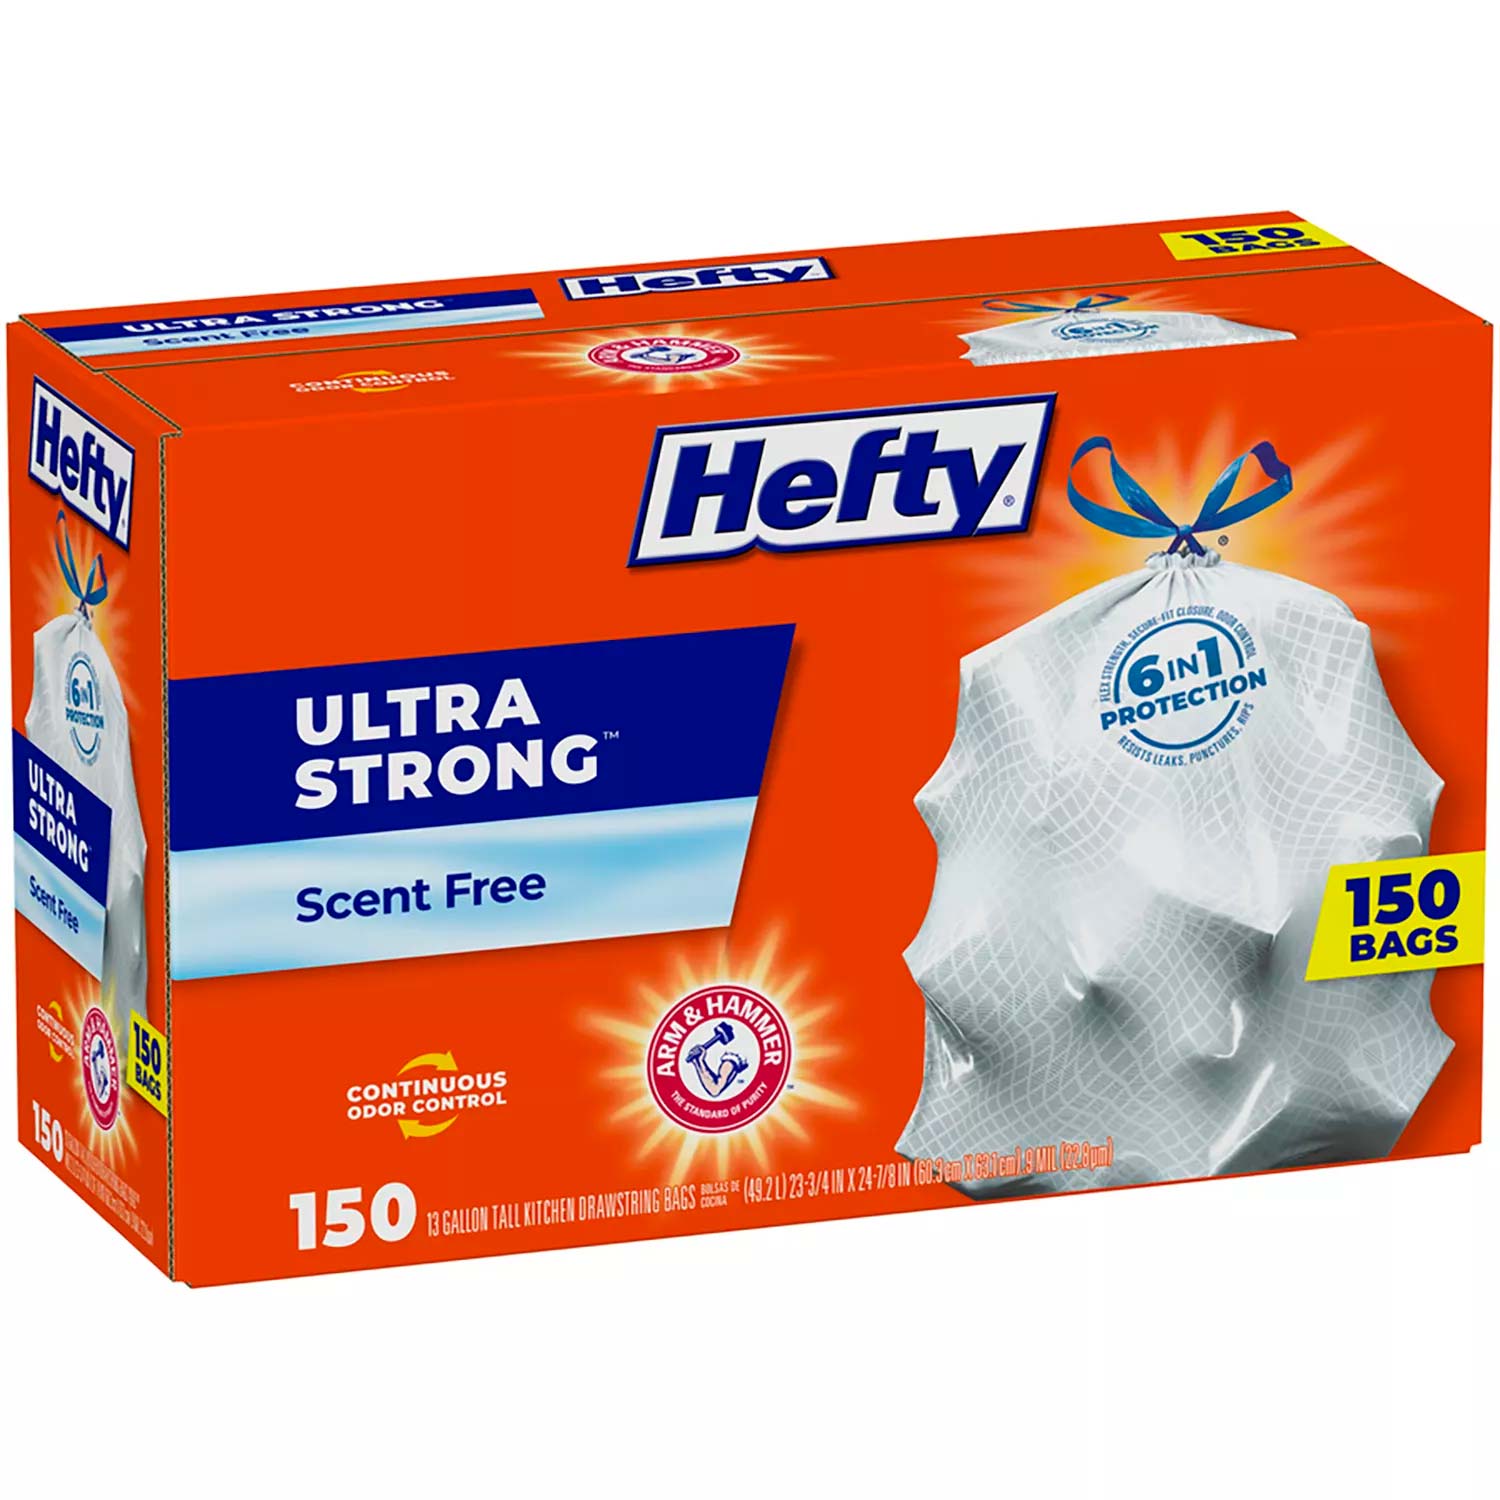 Hefty Clear Drawstring Recycling Trash Bags – 30 Gallon – 36 Count